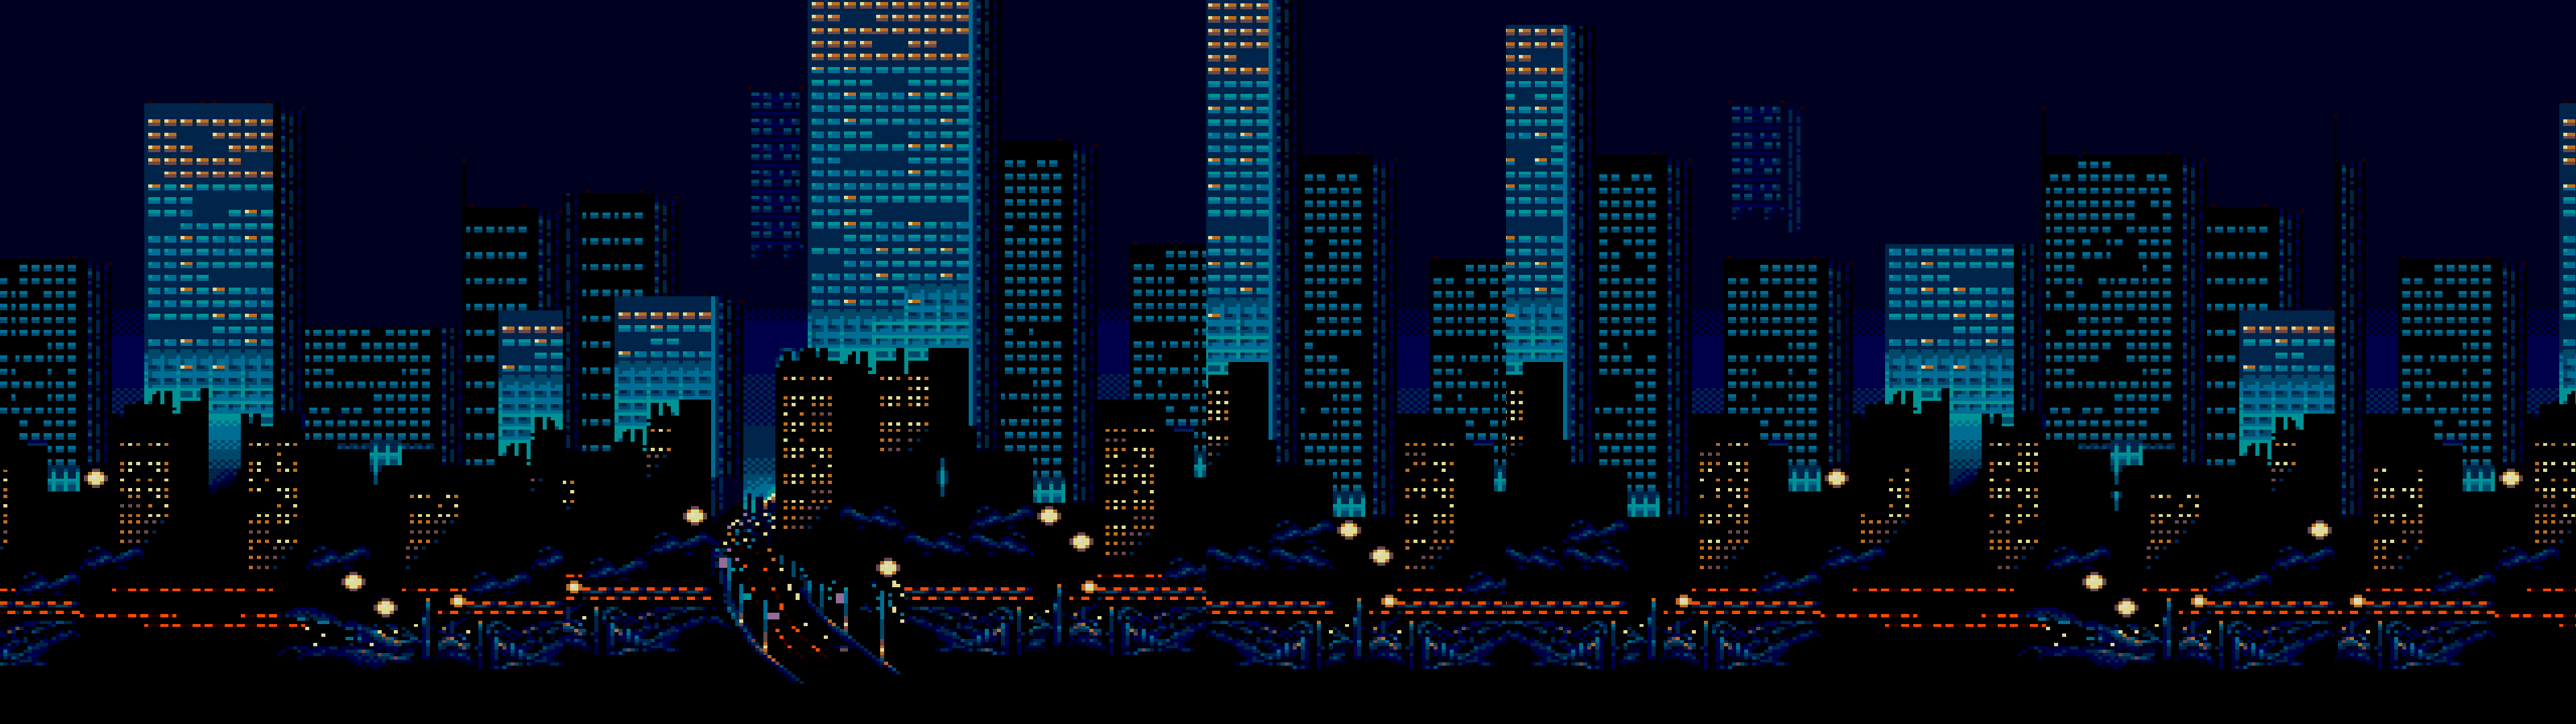 Free download Streets of Rage City 3840X1080 Dual Monitor iimgurcom [ 3840x1080] for your Desktop, Mobile & Tablet. Explore Streets of Rage Wallpaper. Streets of Rage Wallpaper, Rage of Bahamut